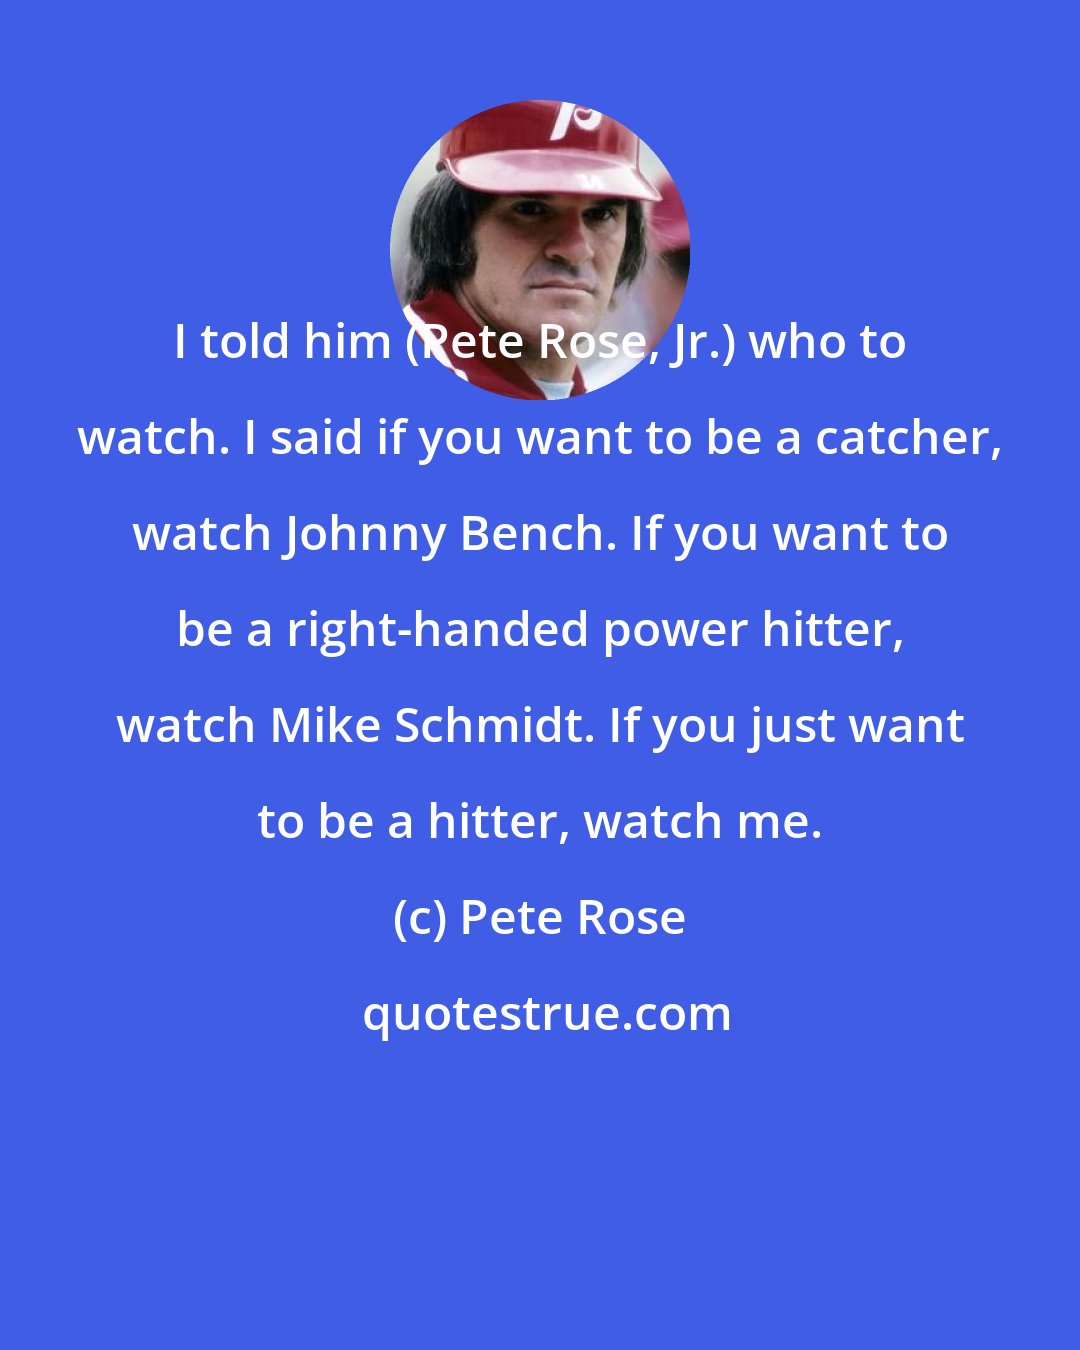 Pete Rose: I told him (Pete Rose, Jr.) who to watch. I said if you want to be a catcher, watch Johnny Bench. If you want to be a right-handed power hitter, watch Mike Schmidt. If you just want to be a hitter, watch me.